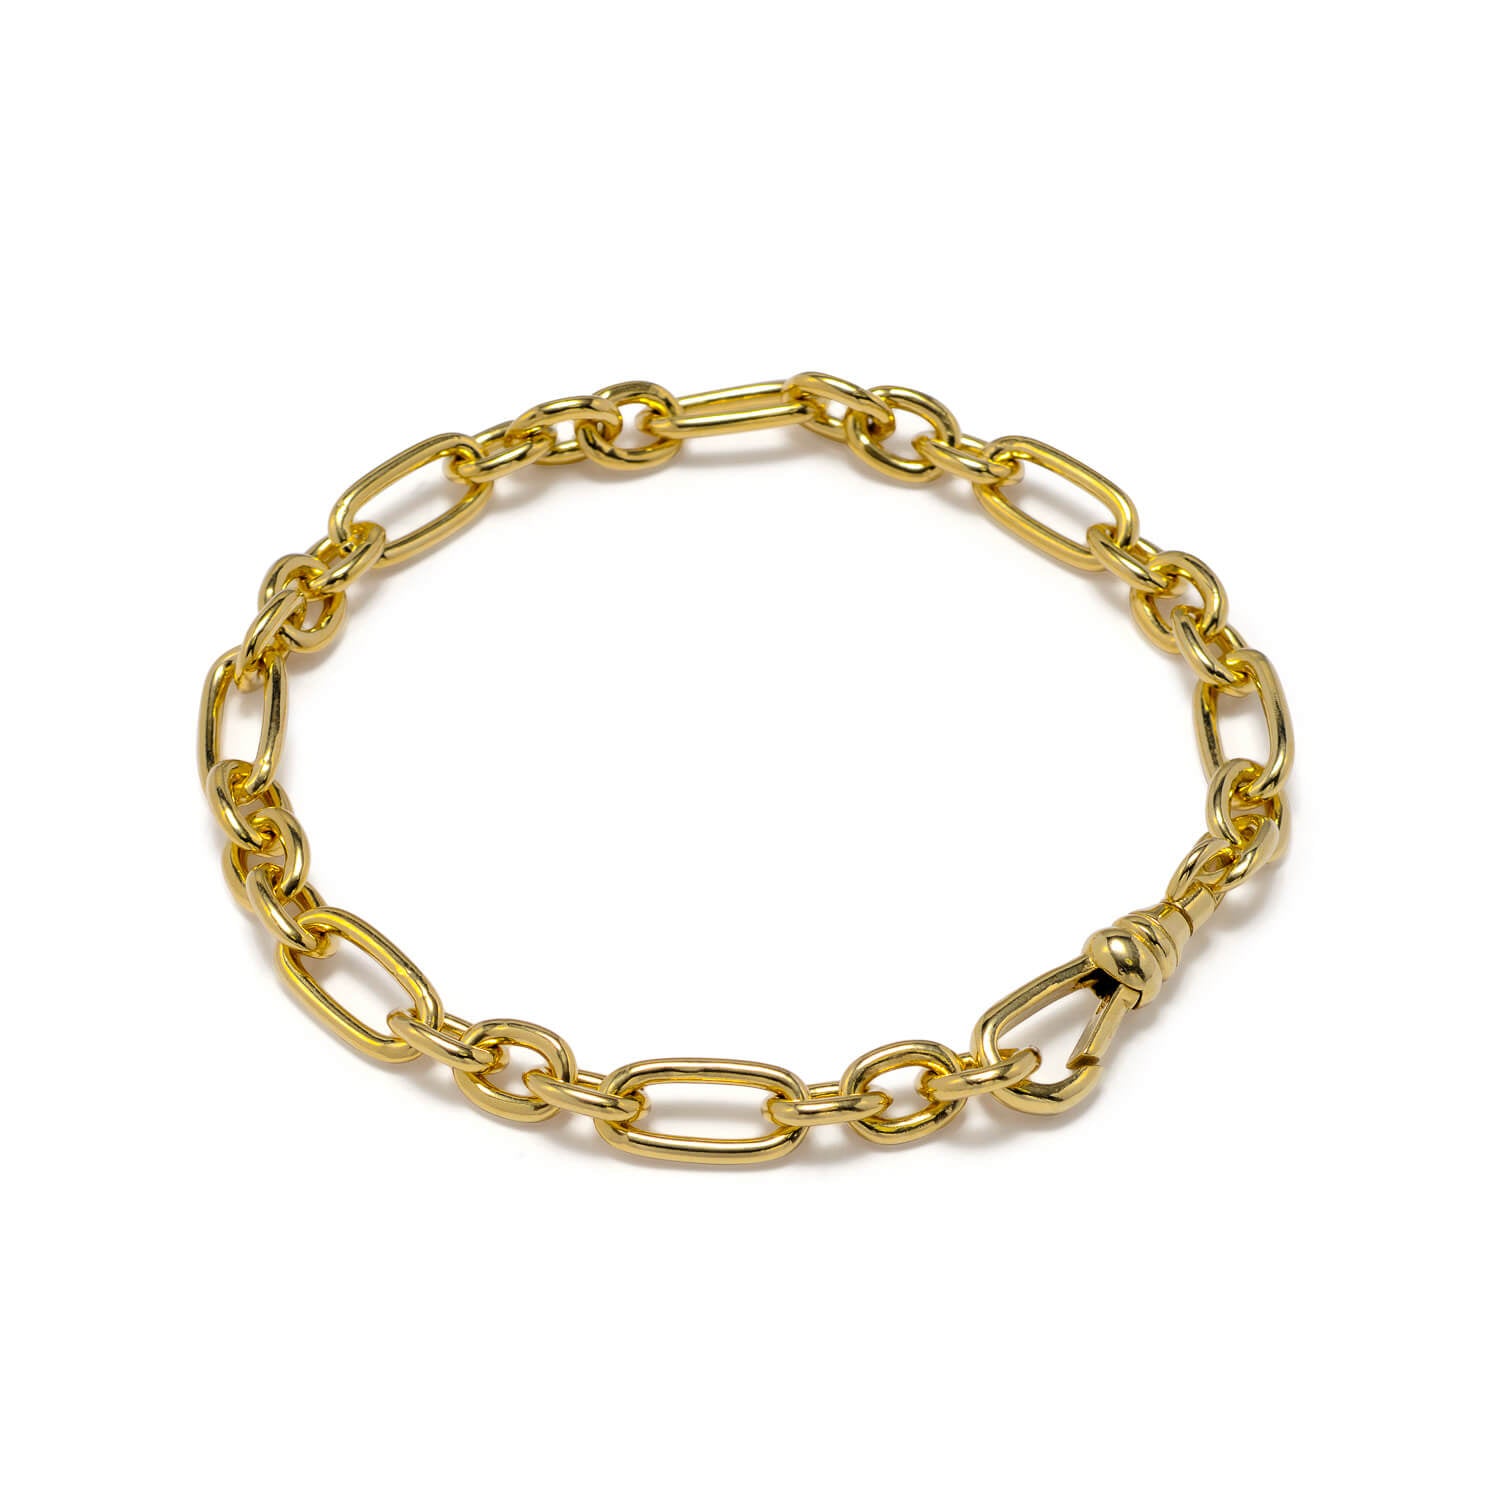 Gold Chain Bracelet - Fetter (7 or 7.5" chain available)